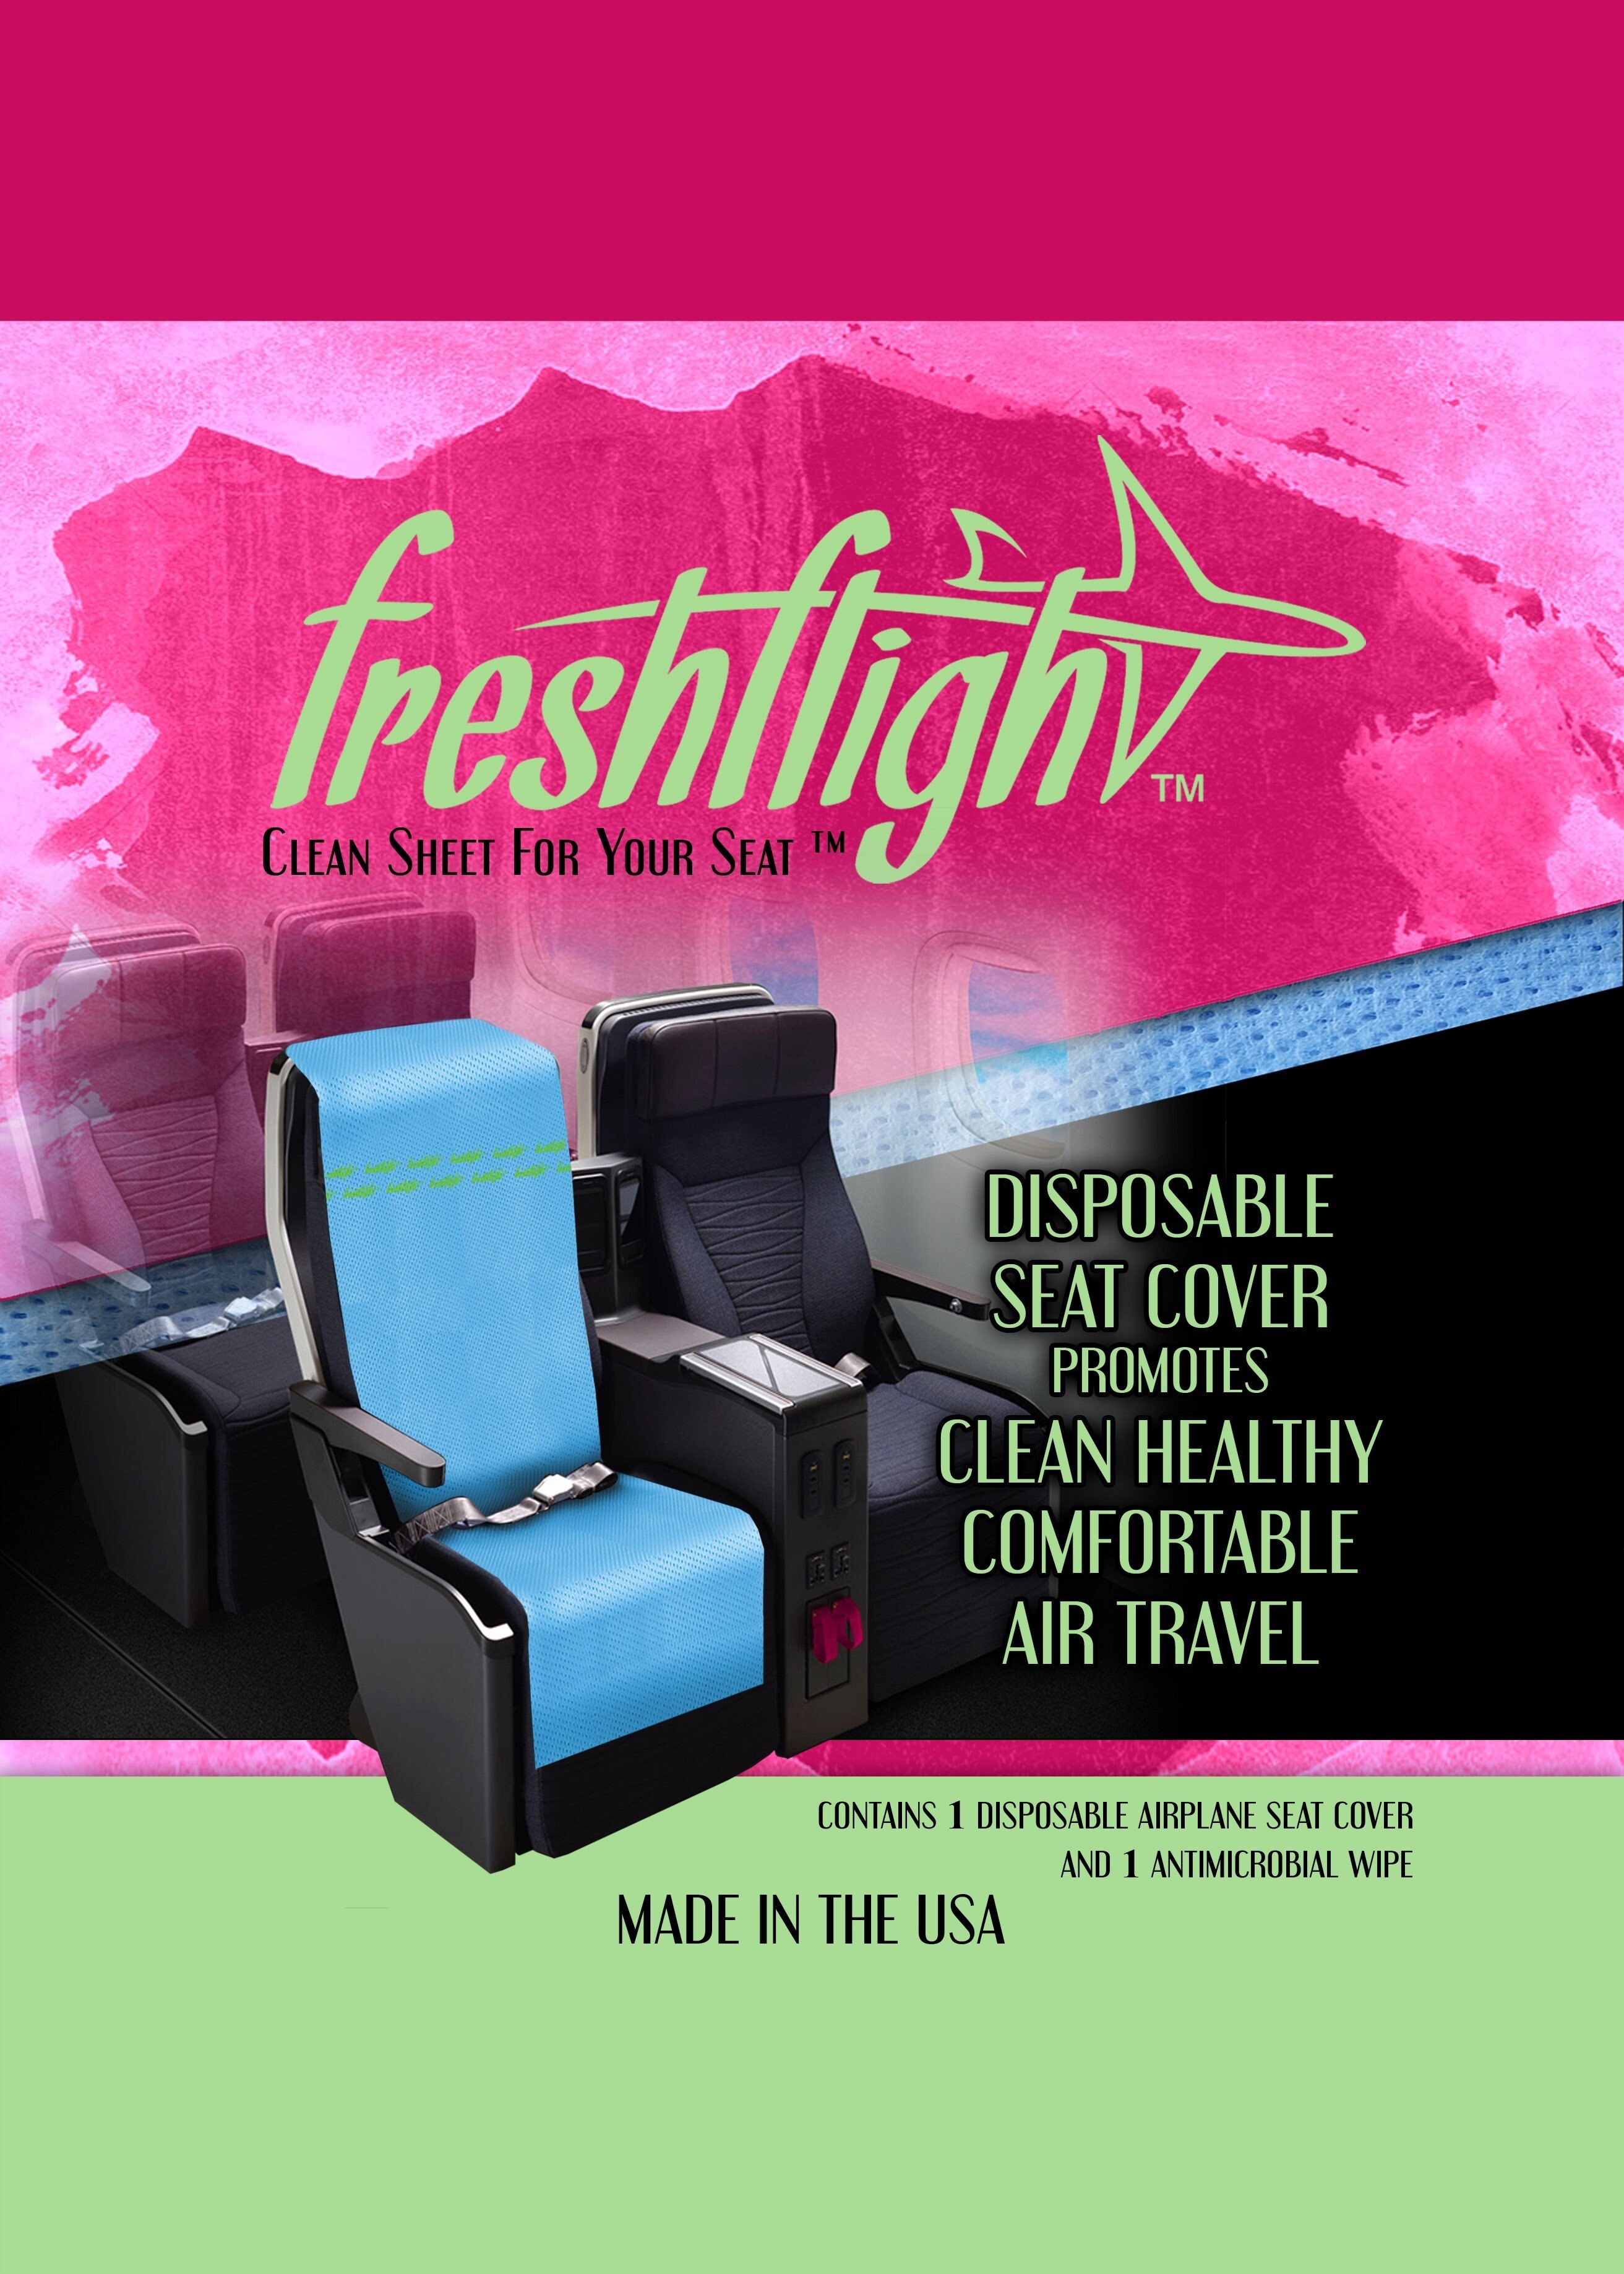 Personal, portable seat covers could become the norm on flights in a post-coronavirus world. Photo: Handout